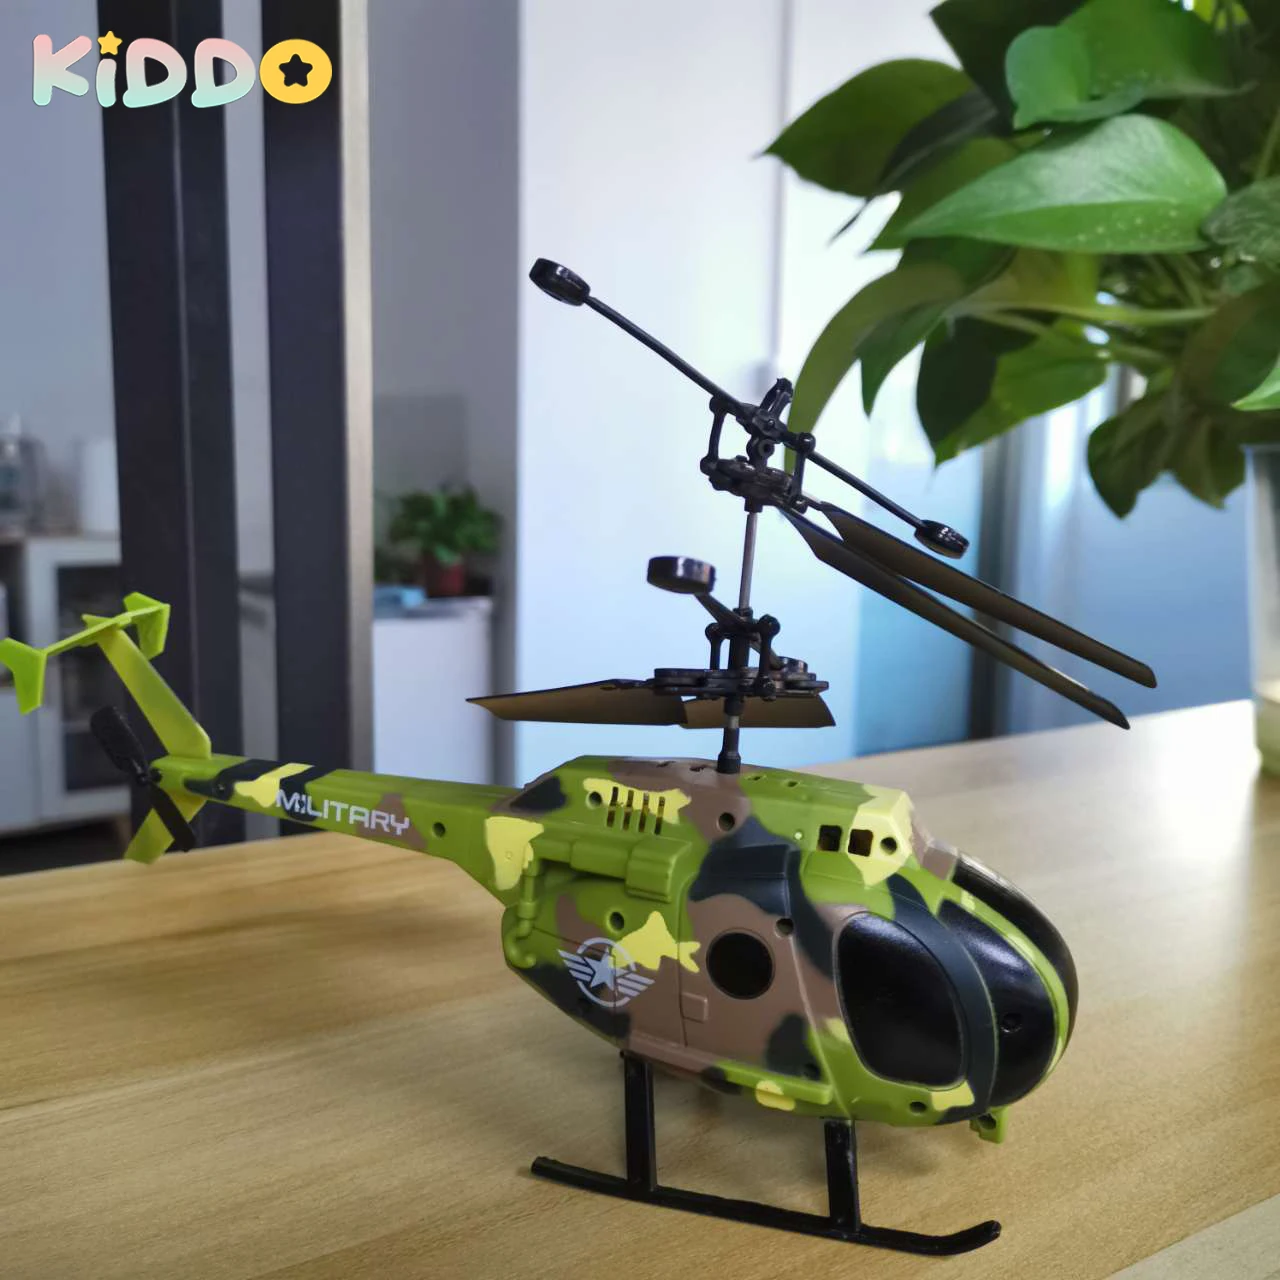 

RC Helicopter Remote Control Drone Toy Aircraft 2CH 360 Rotate USB Charge Control Drone Kid Plane Toys 2.4G outdoor Flight Toys